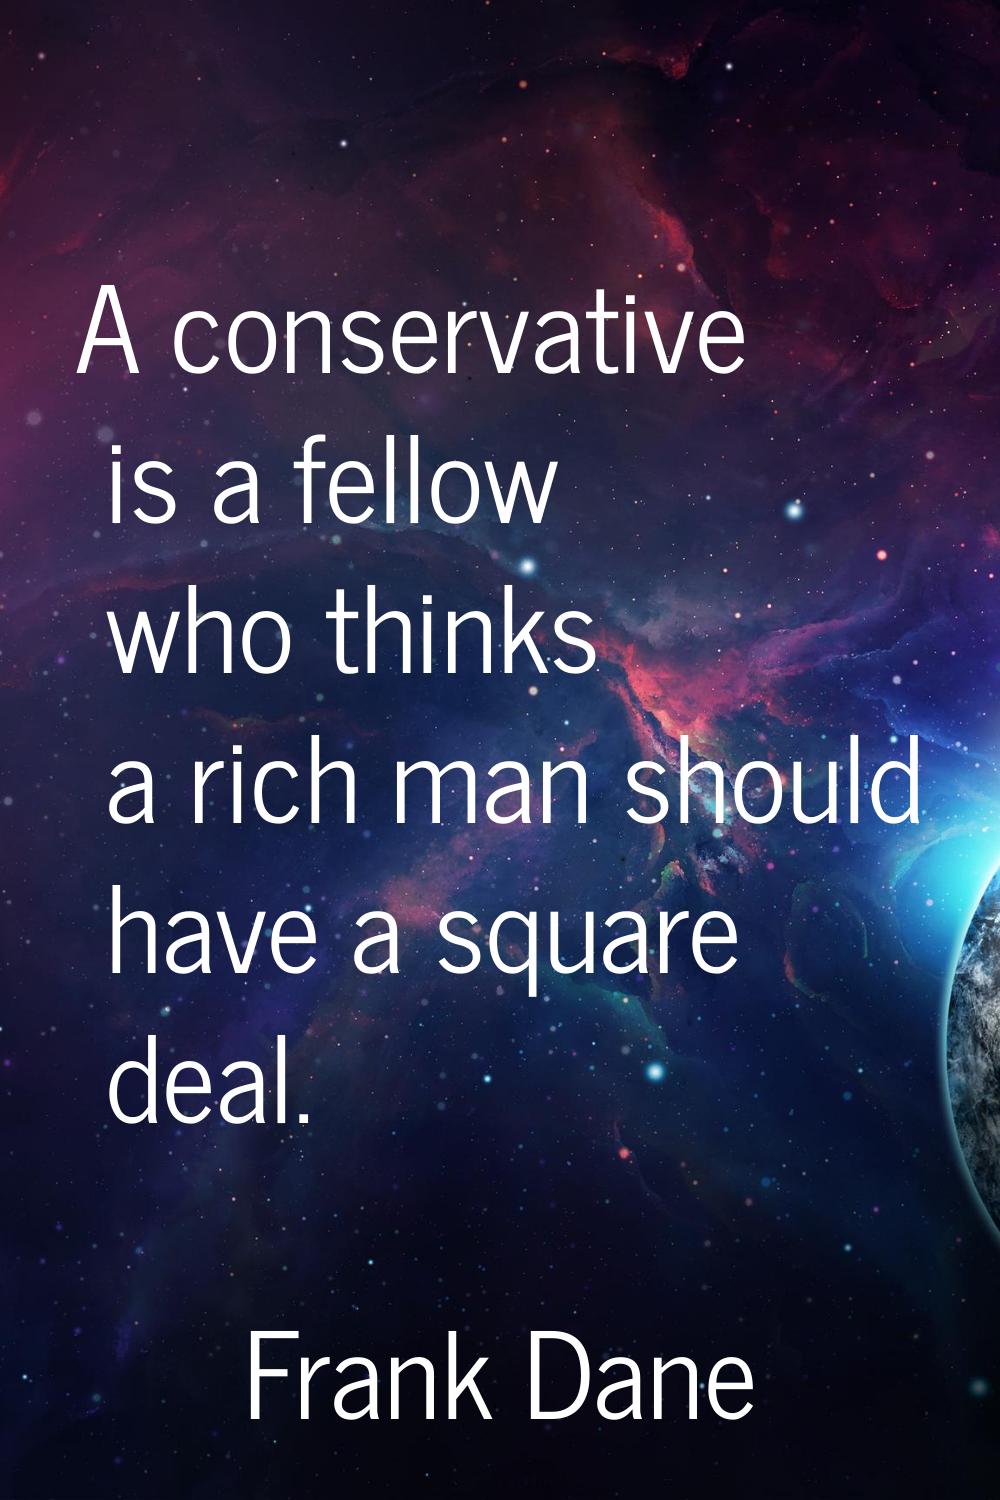 A conservative is a fellow who thinks a rich man should have a square deal.